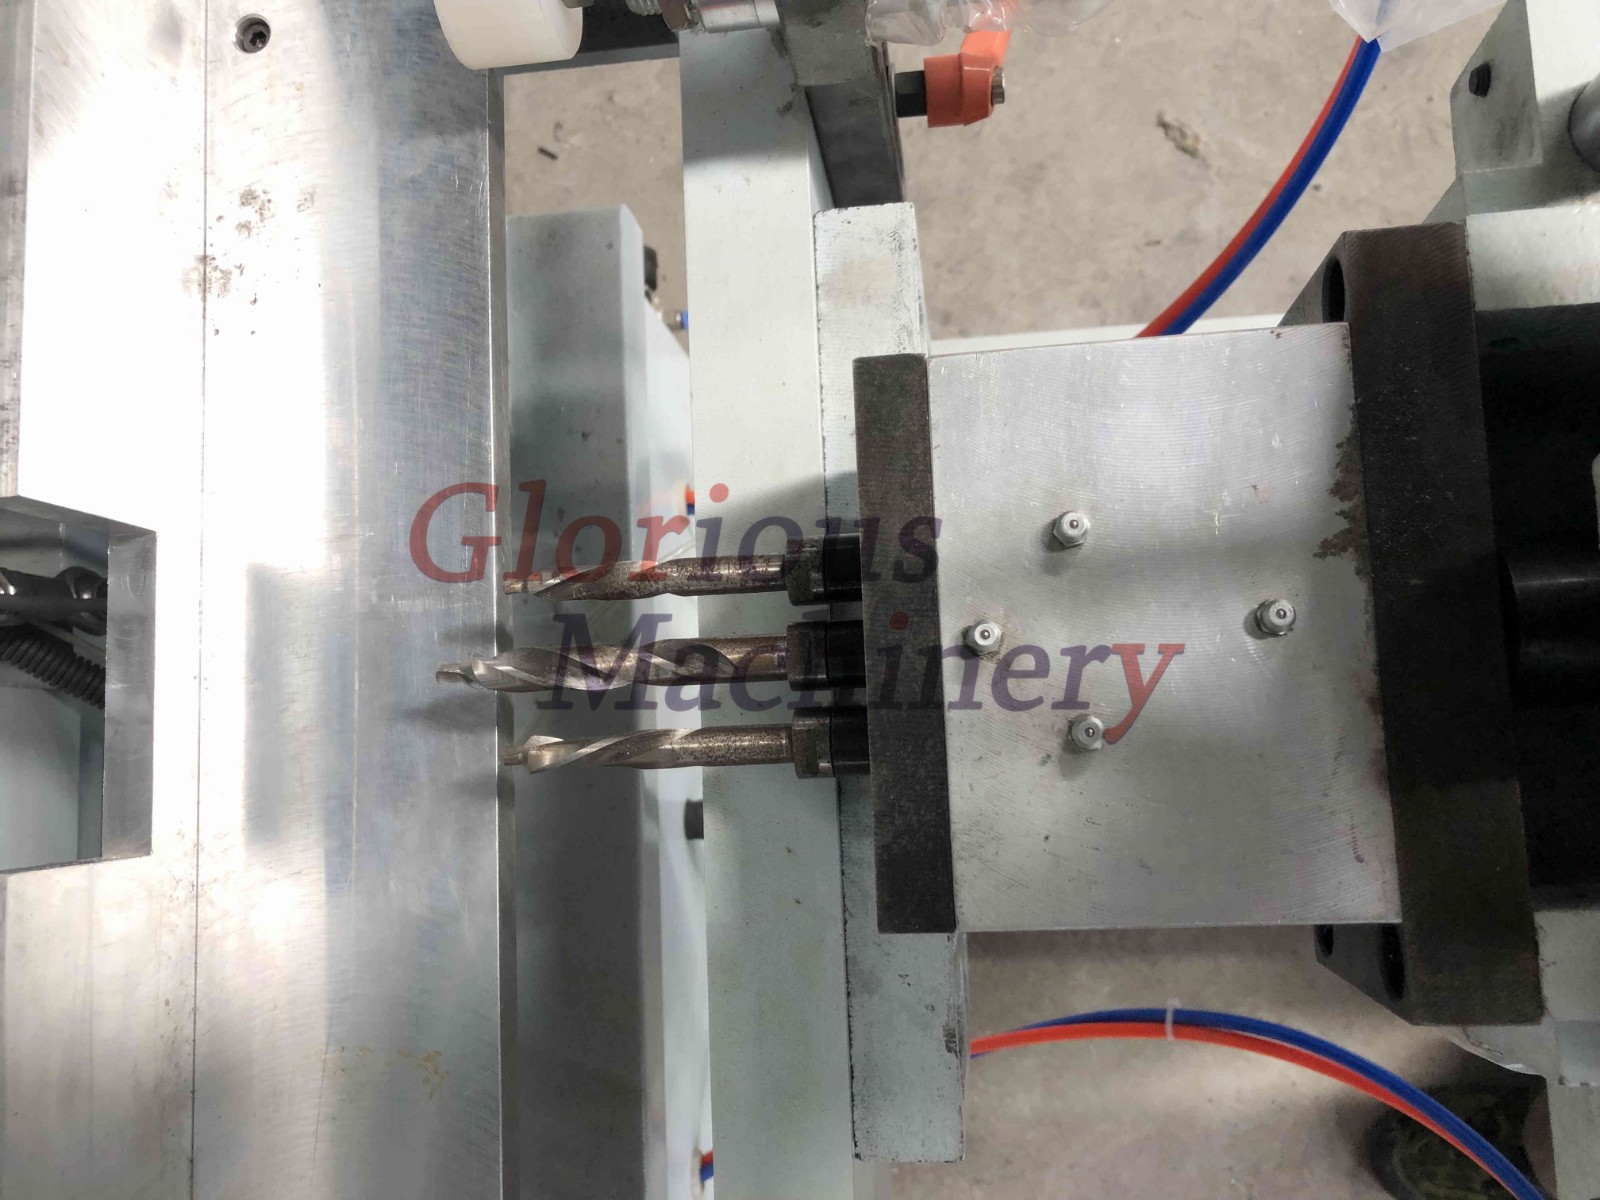 window drilling and milling machine